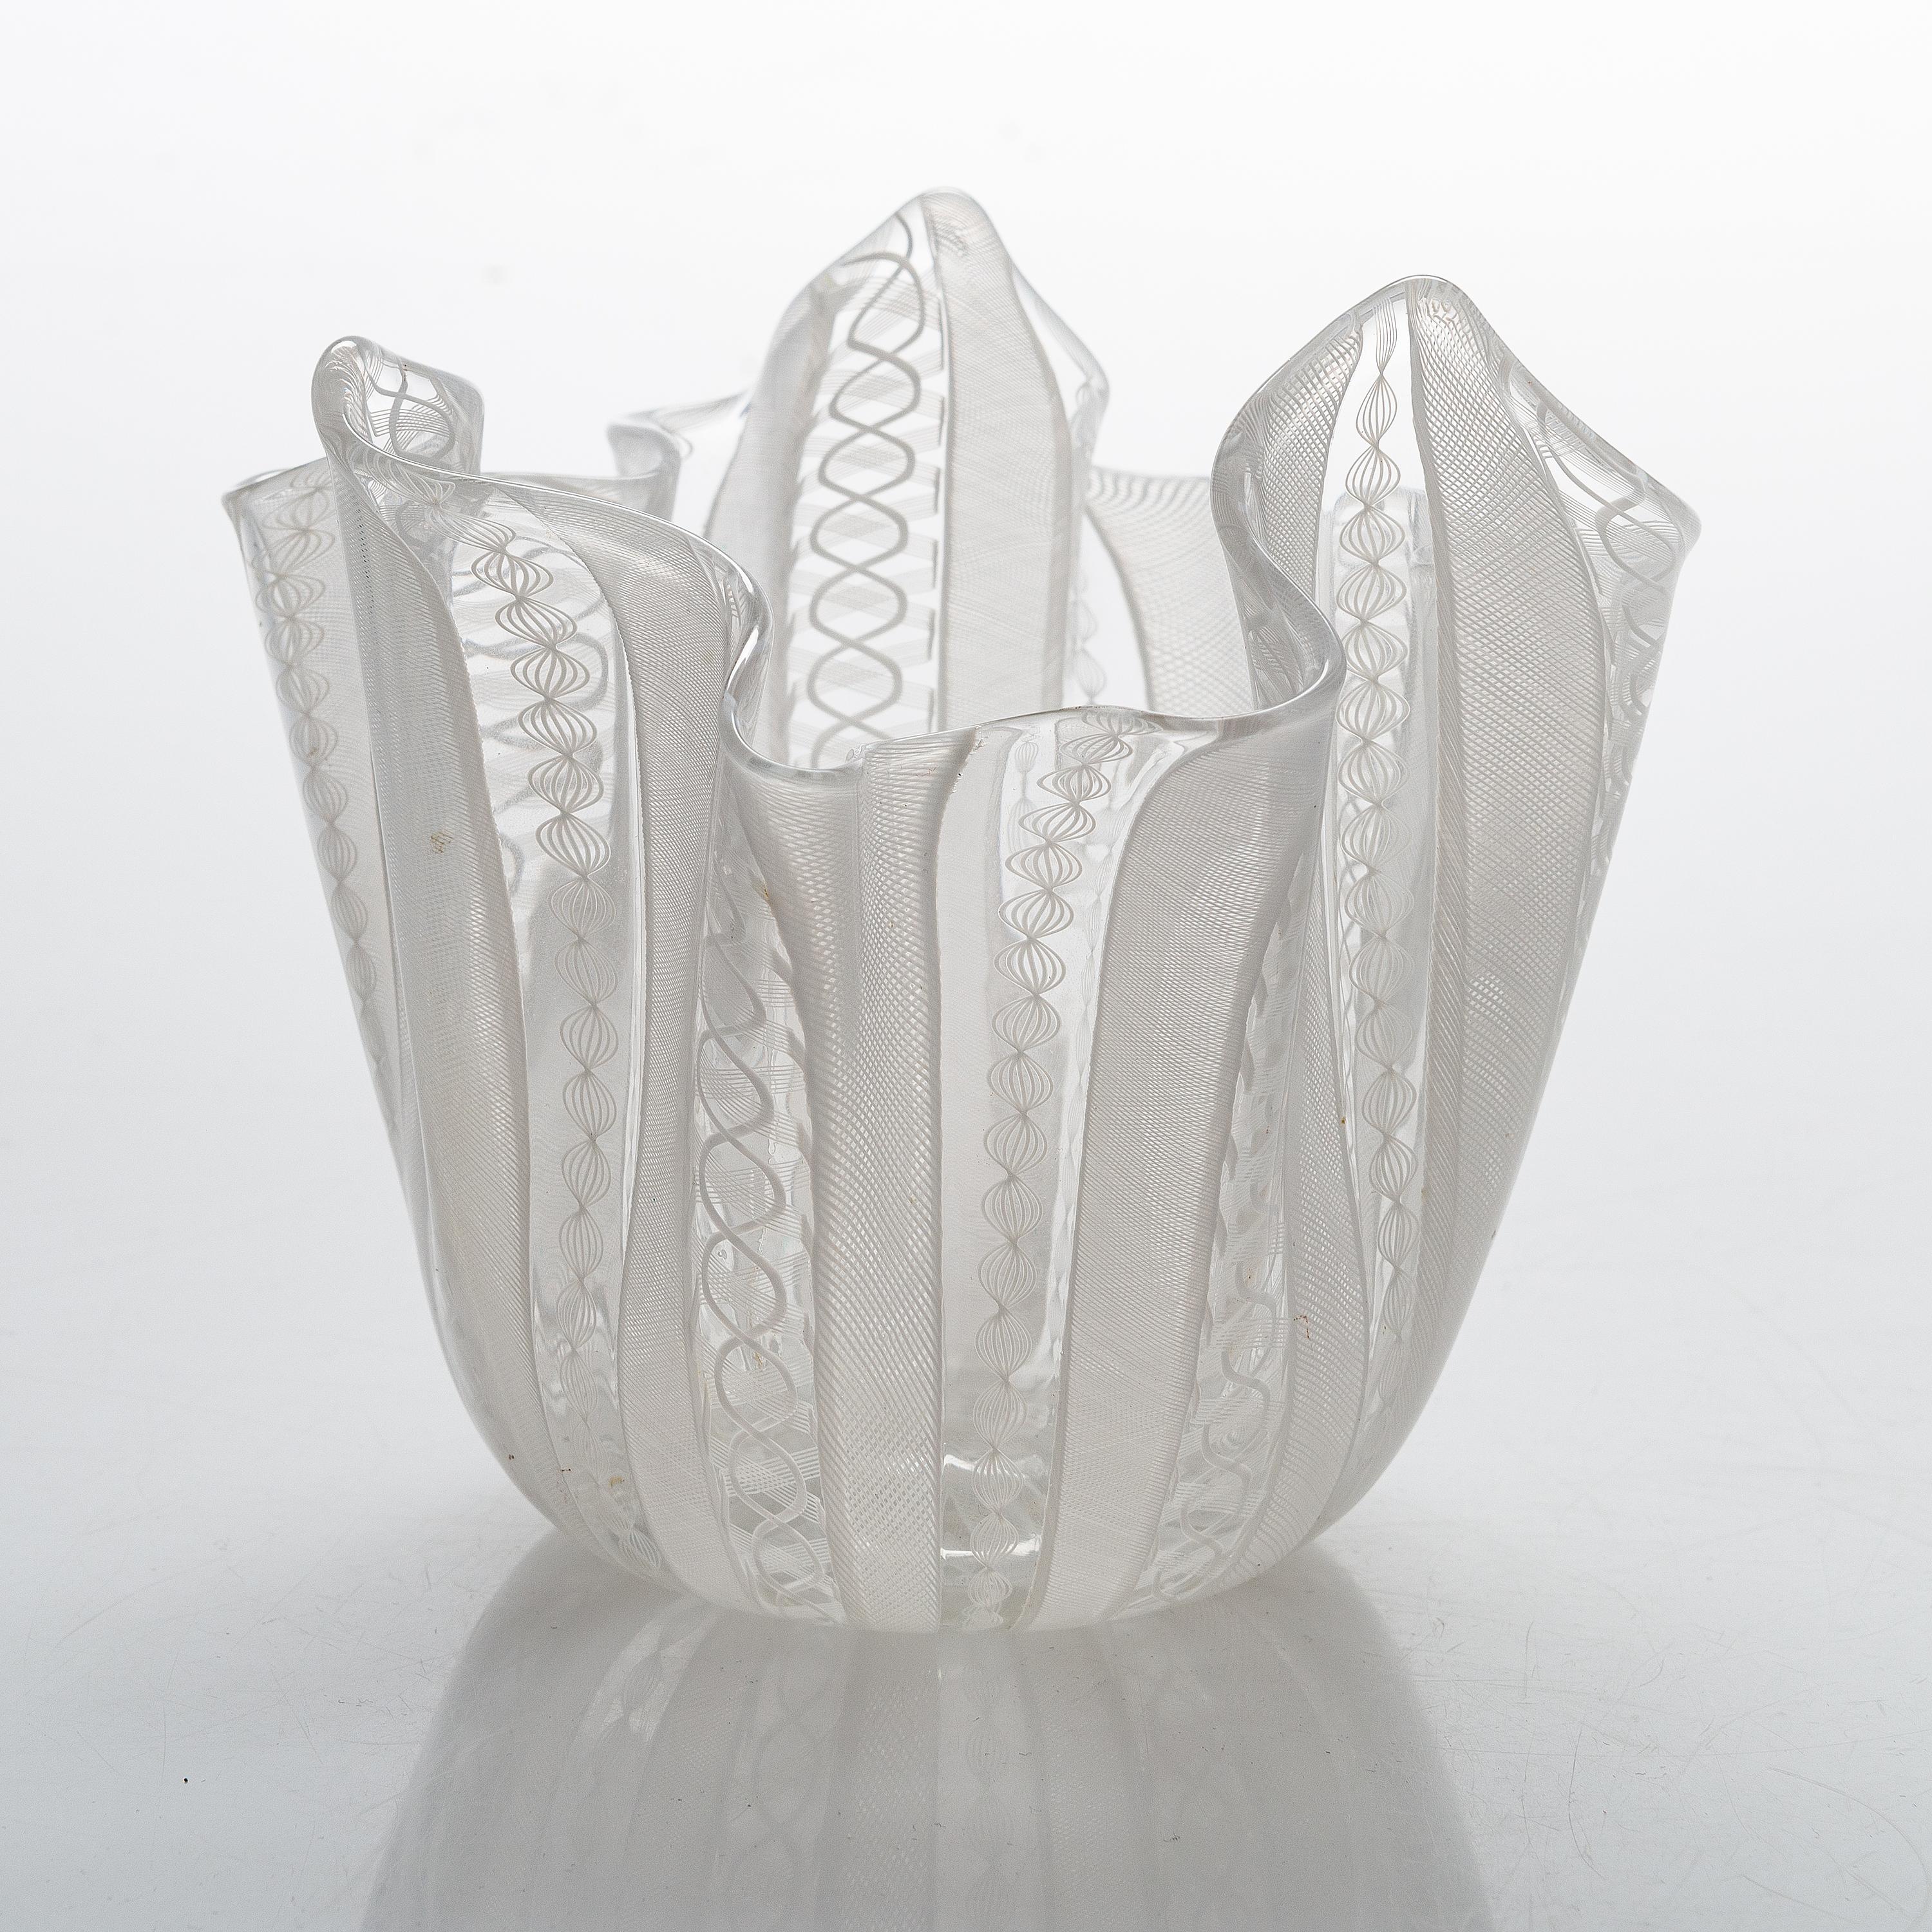 Two white handkerchief vases/bowls, featuring zanfirico filigree glass from Venini, Murano. These Venetian glass vases/bowls showcase delicate stripes of white zanfirico lattice filigree. While the origin of the other manufacturer remains unknown,